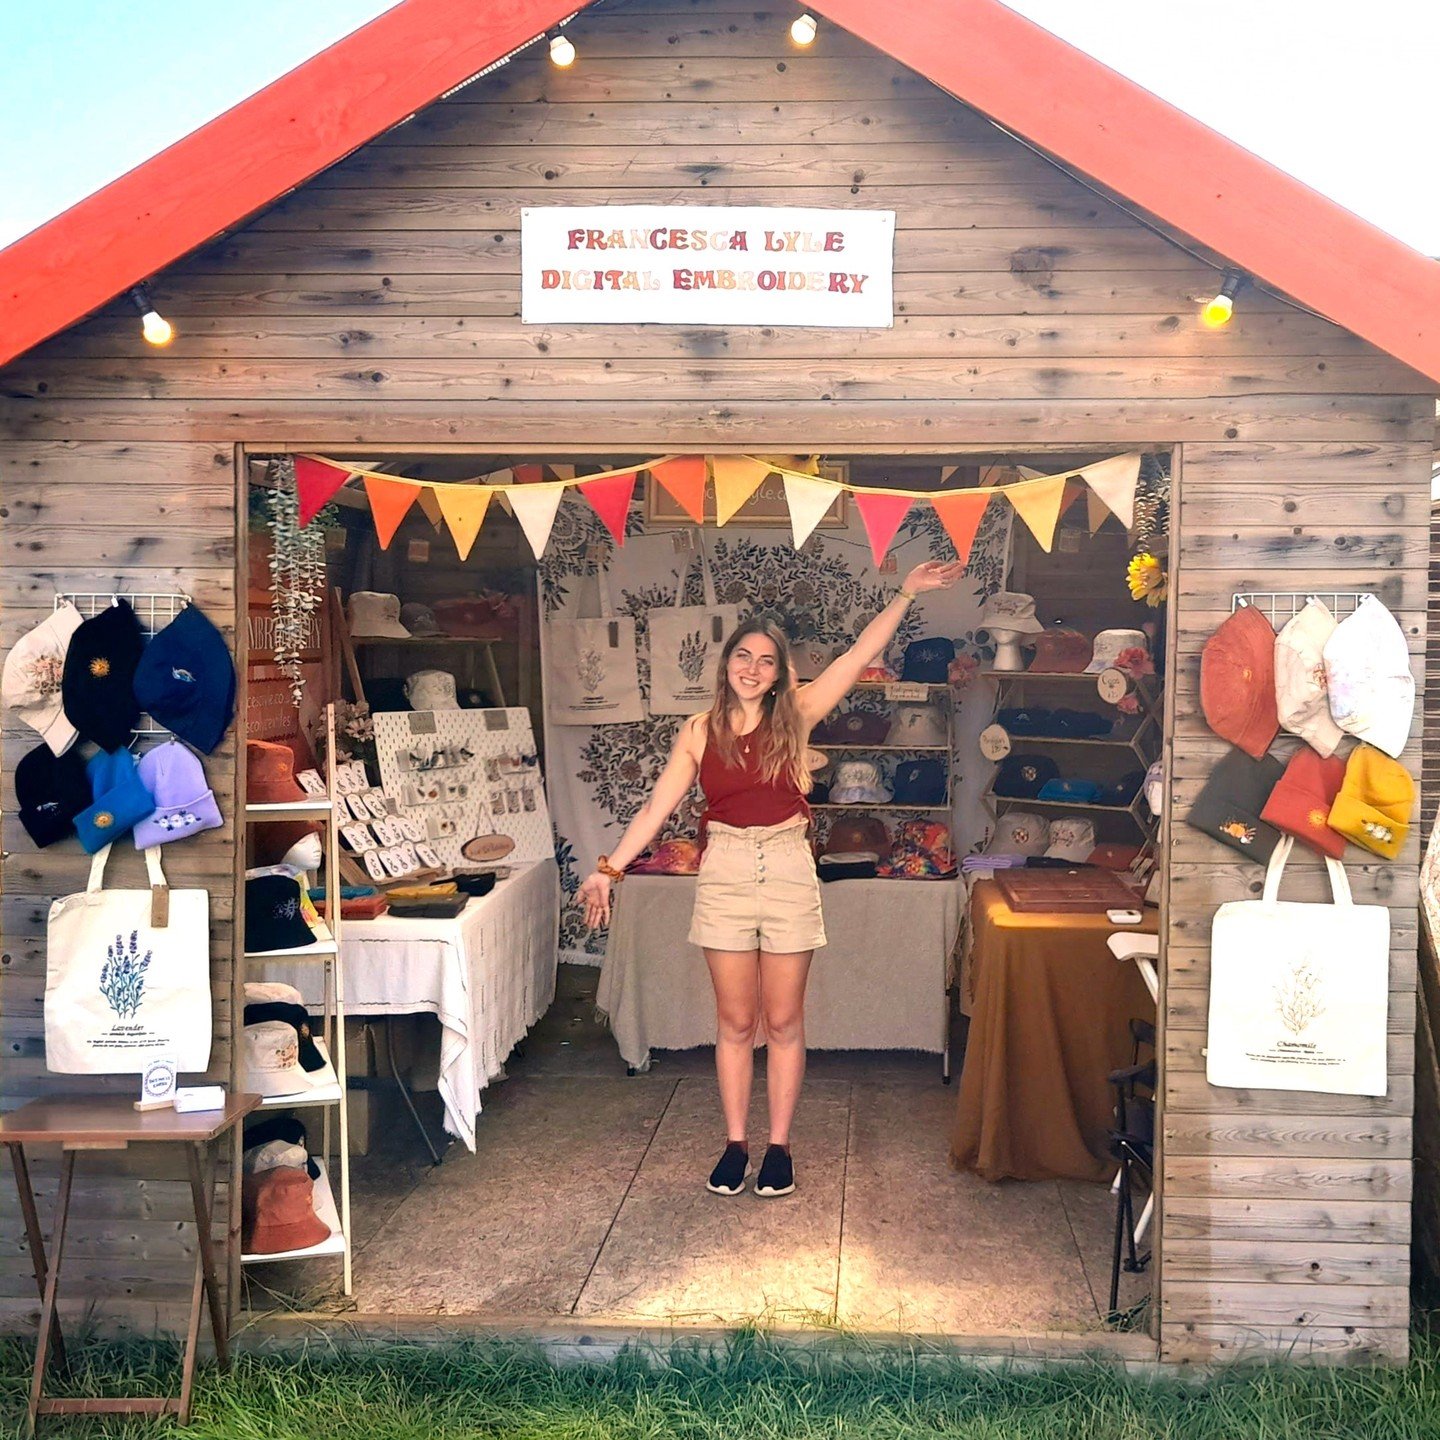 Sooooo excited to say I will be trading again @victoriousfestival this year!! 🌞 I had the best time last year and I can't wait to be back and say hello to lots of old &amp; new faces!🥰🎉